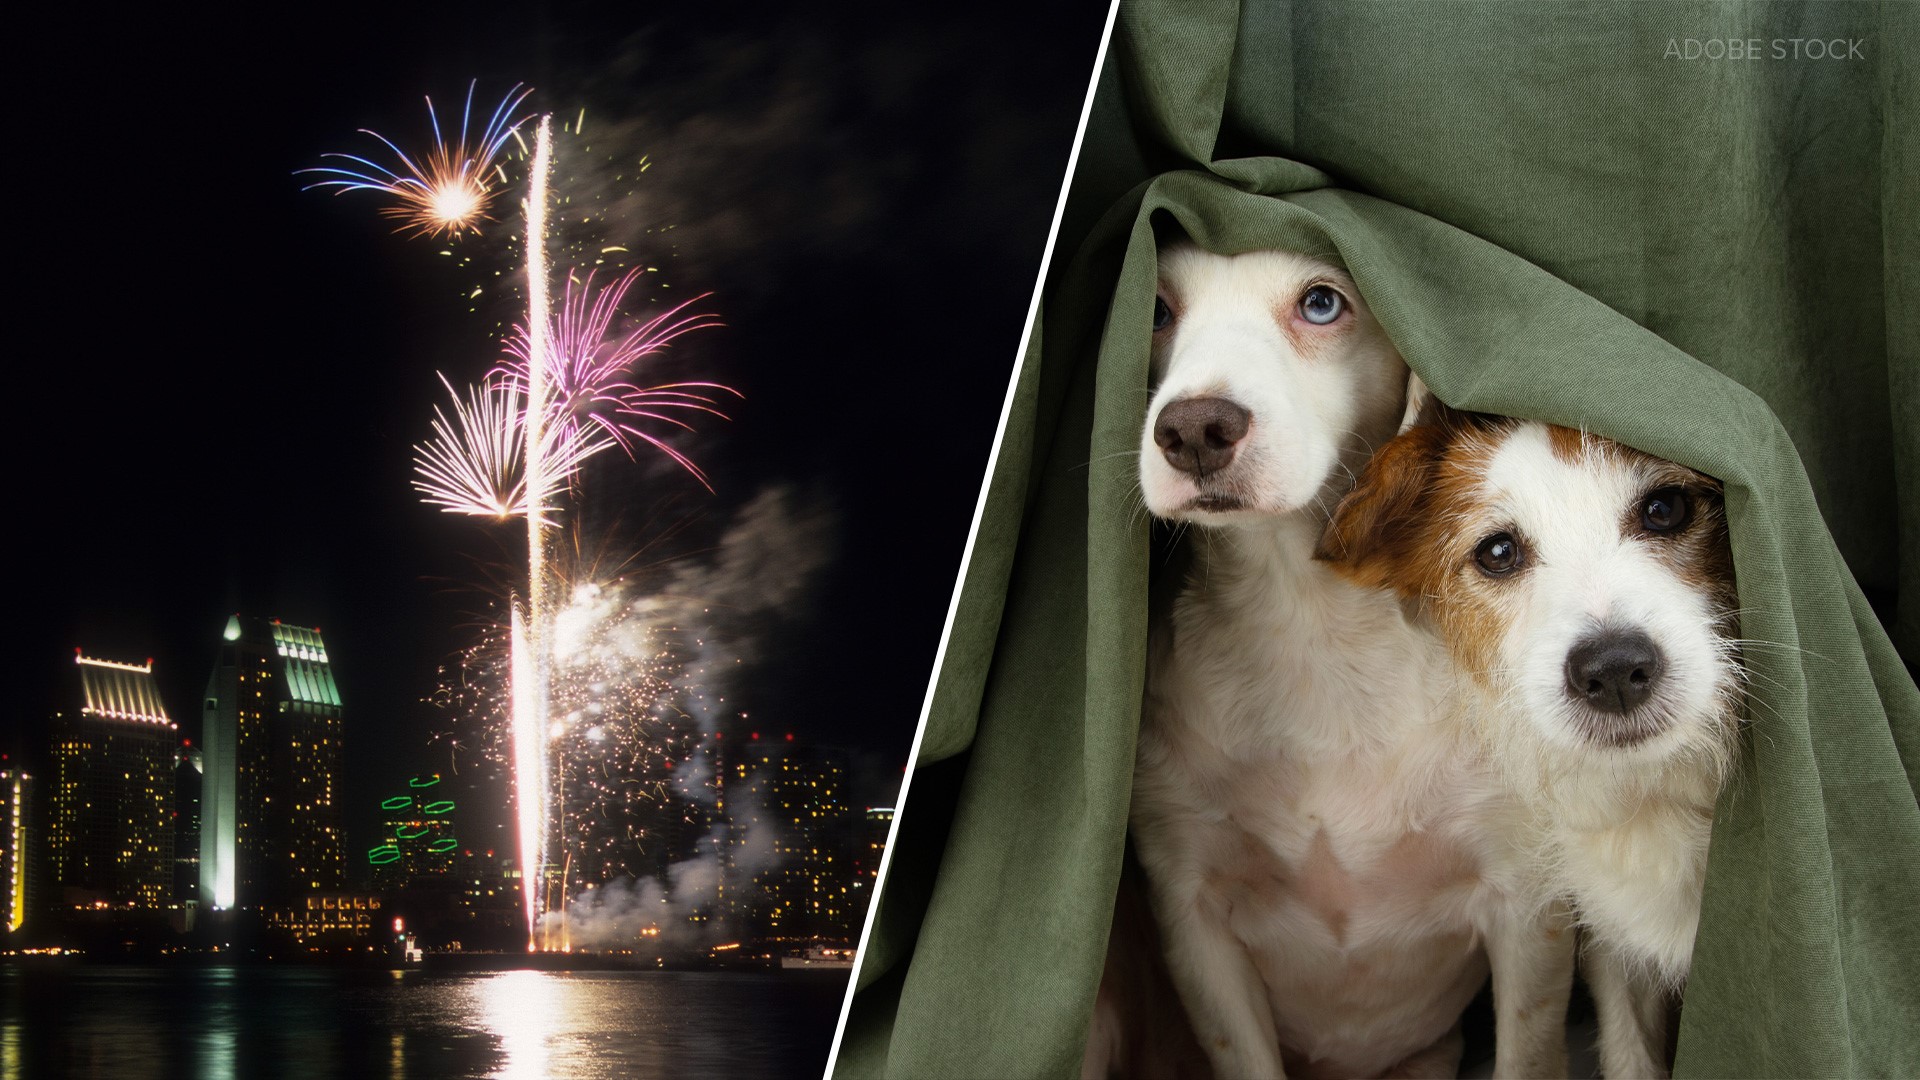 The most patriotic day of the year can be a nightmare for many pets, but there are ways you can help when fireworks are in the air.